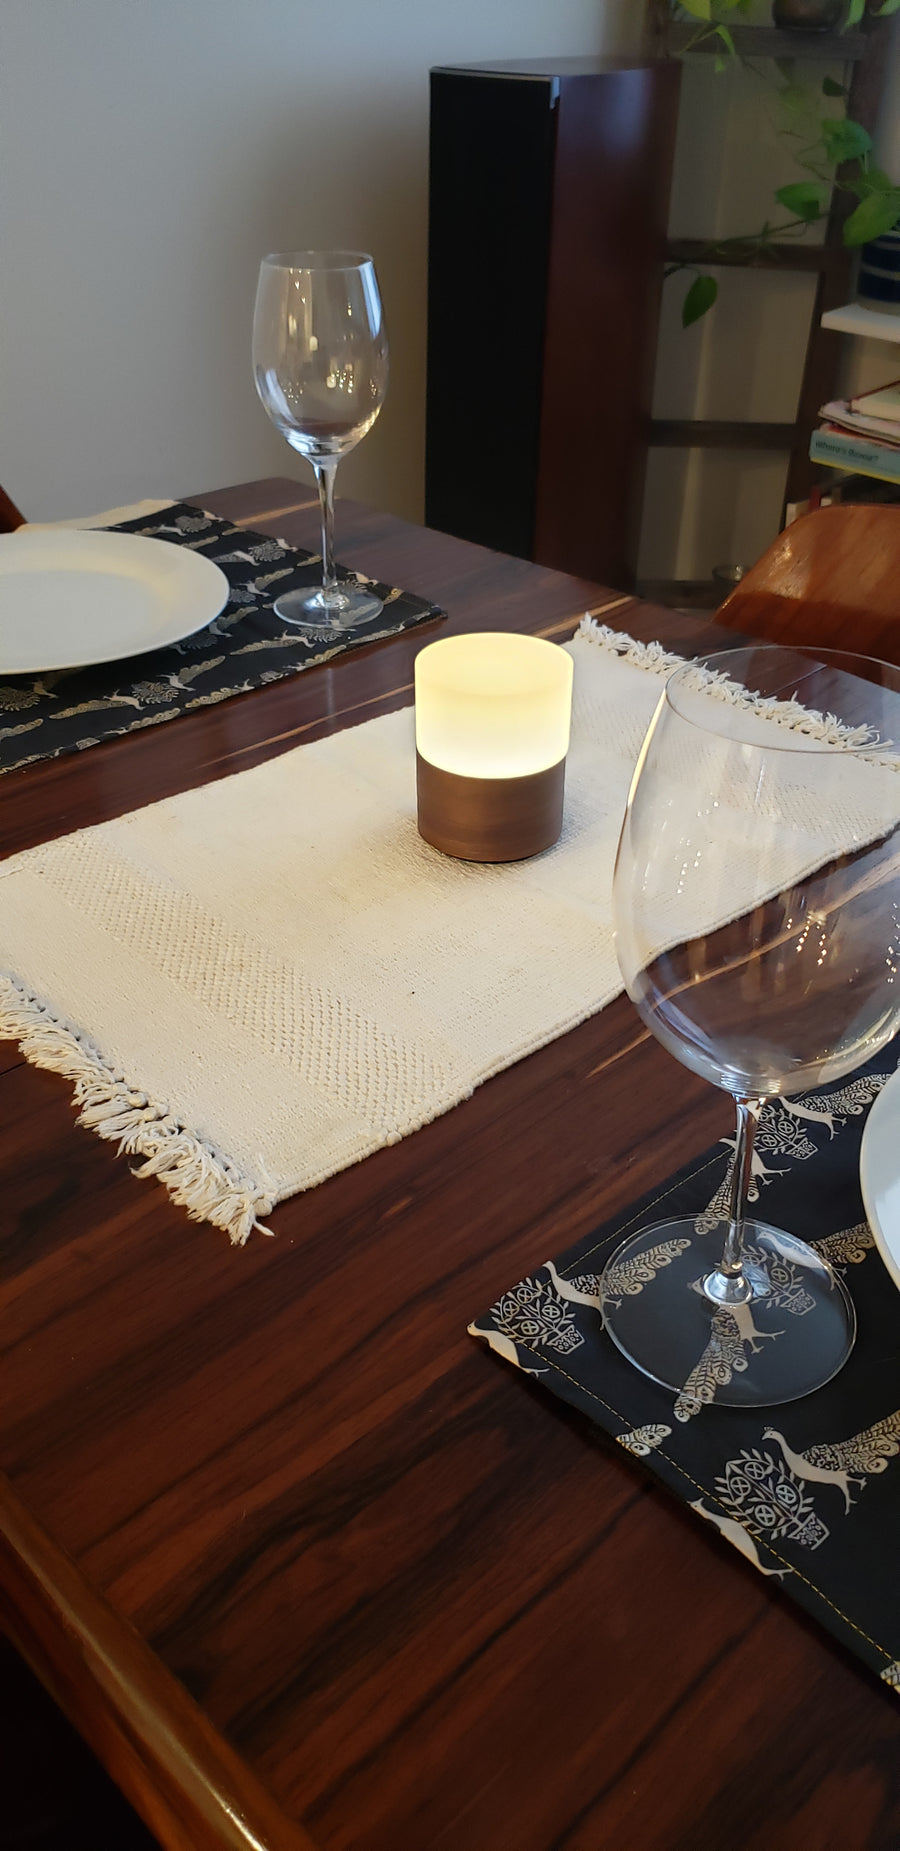 Ola Walnut resting on dining room table with dinner setting and wine glasses.